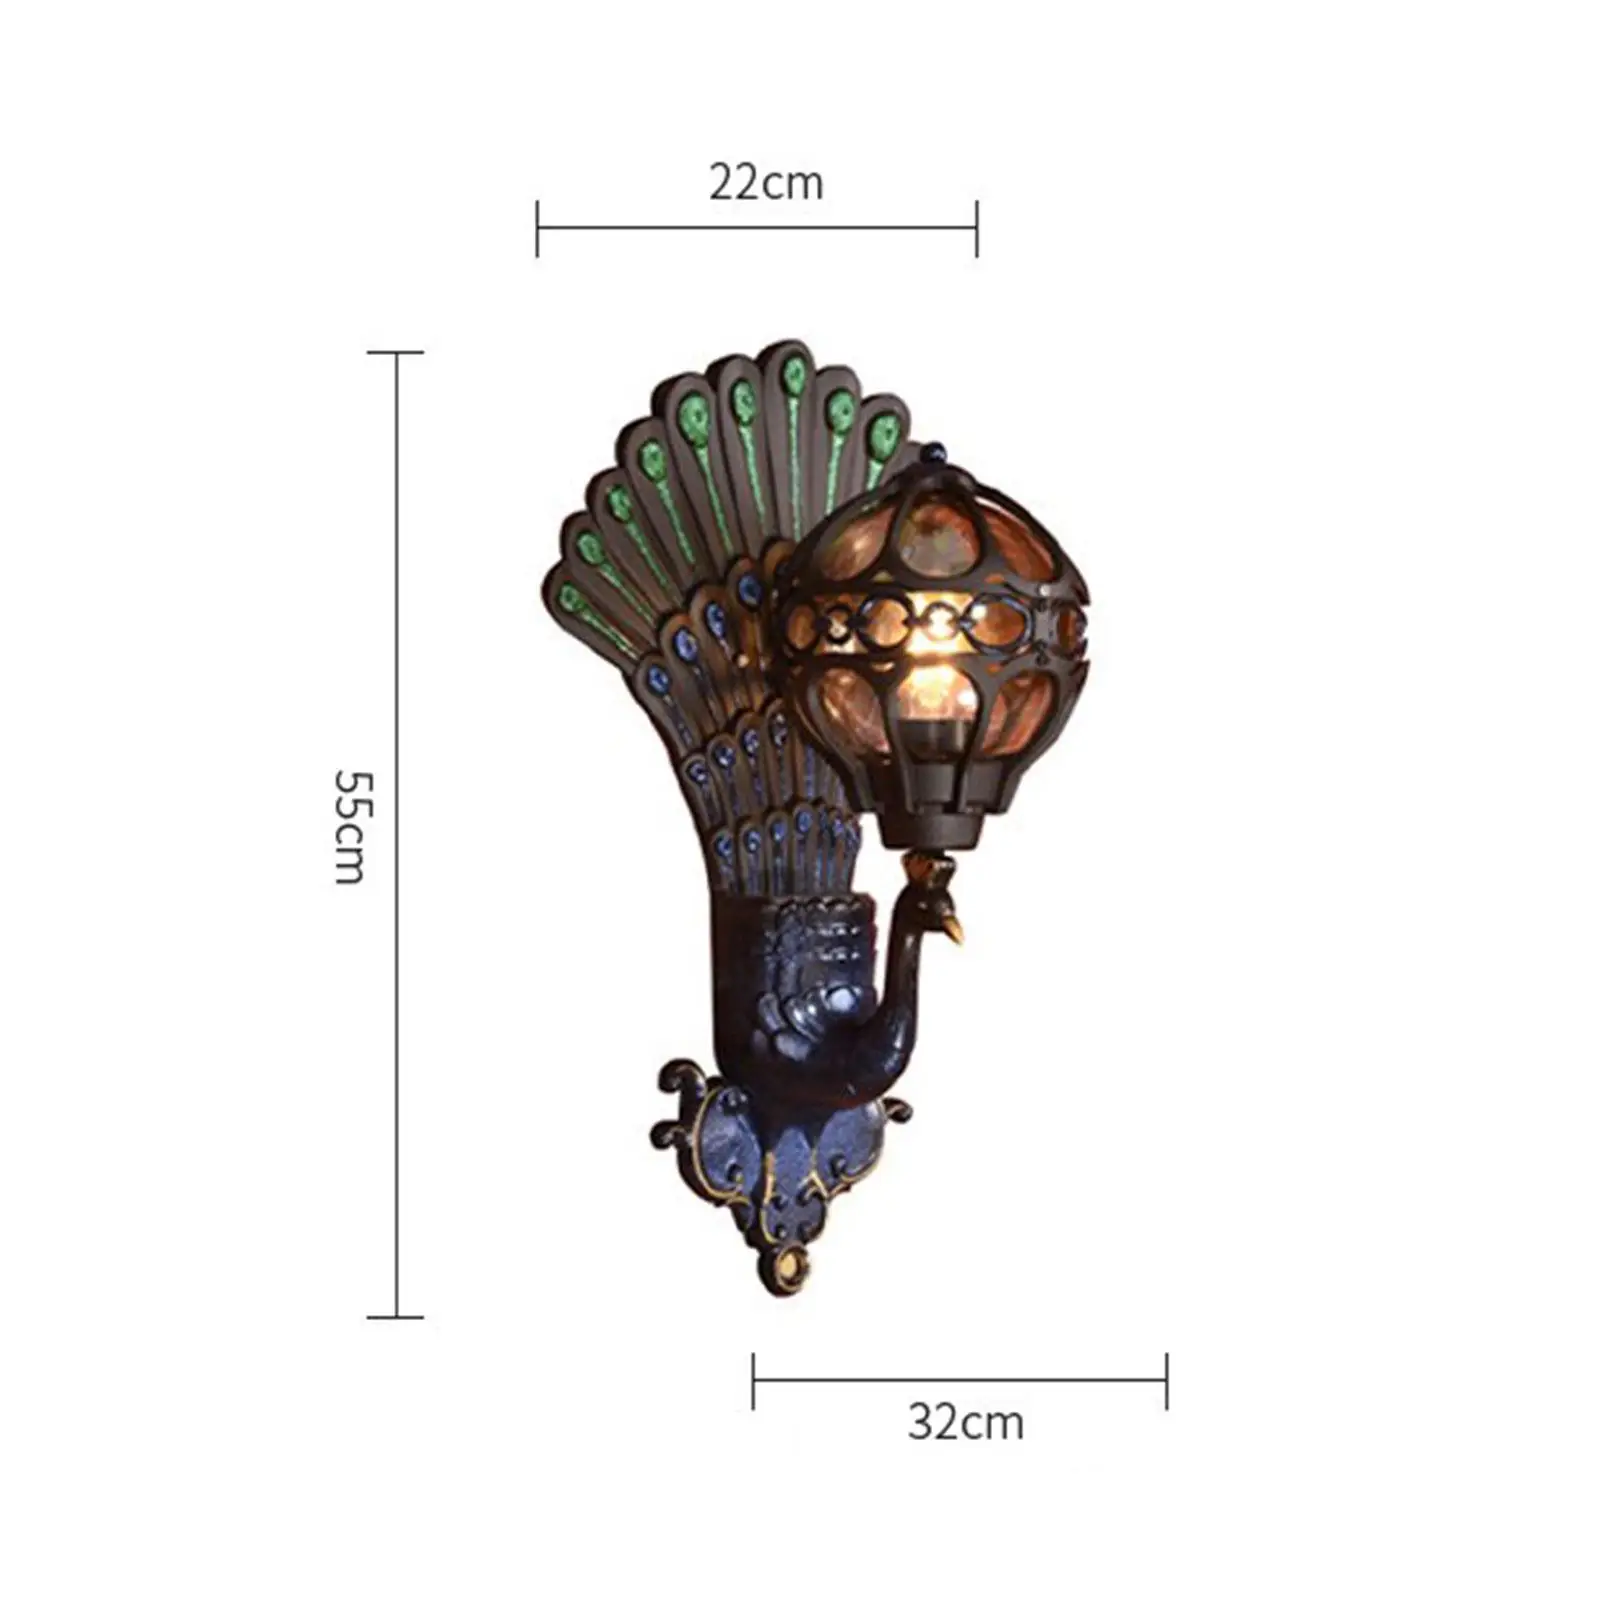 Outdoor Peacock Wall Light Landscape Lights Creative Retro Style Waterproof Wall Lamps for Outdoor Courtyard Deck Patio Decor